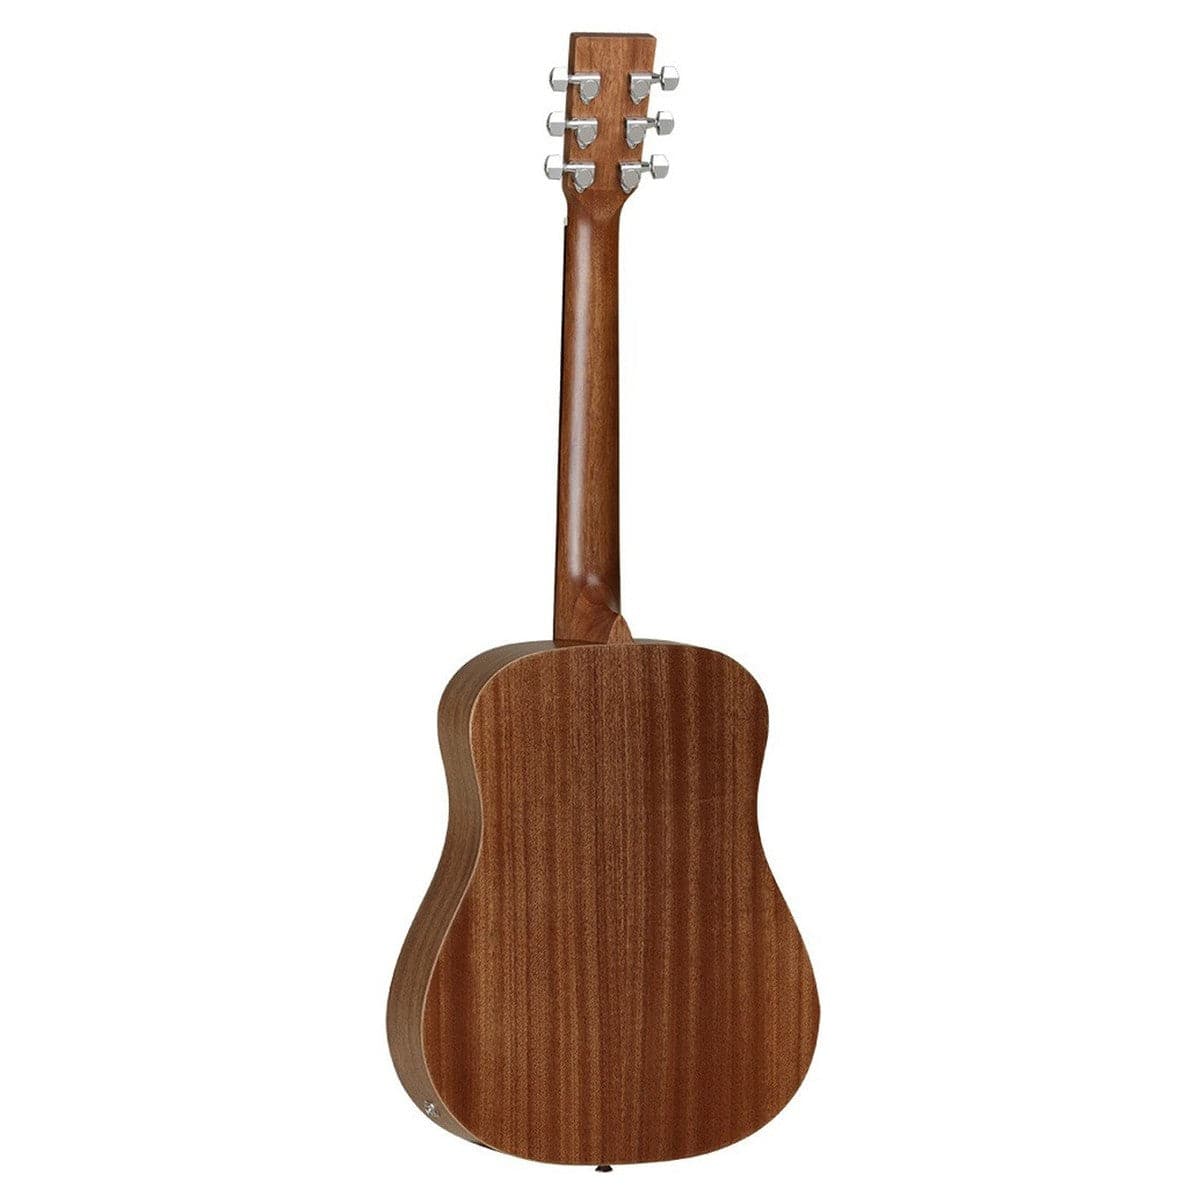 Tanglewood TW2-T Winterleaf Travel Acoustic Guitar - Mahogany with Gig Bag